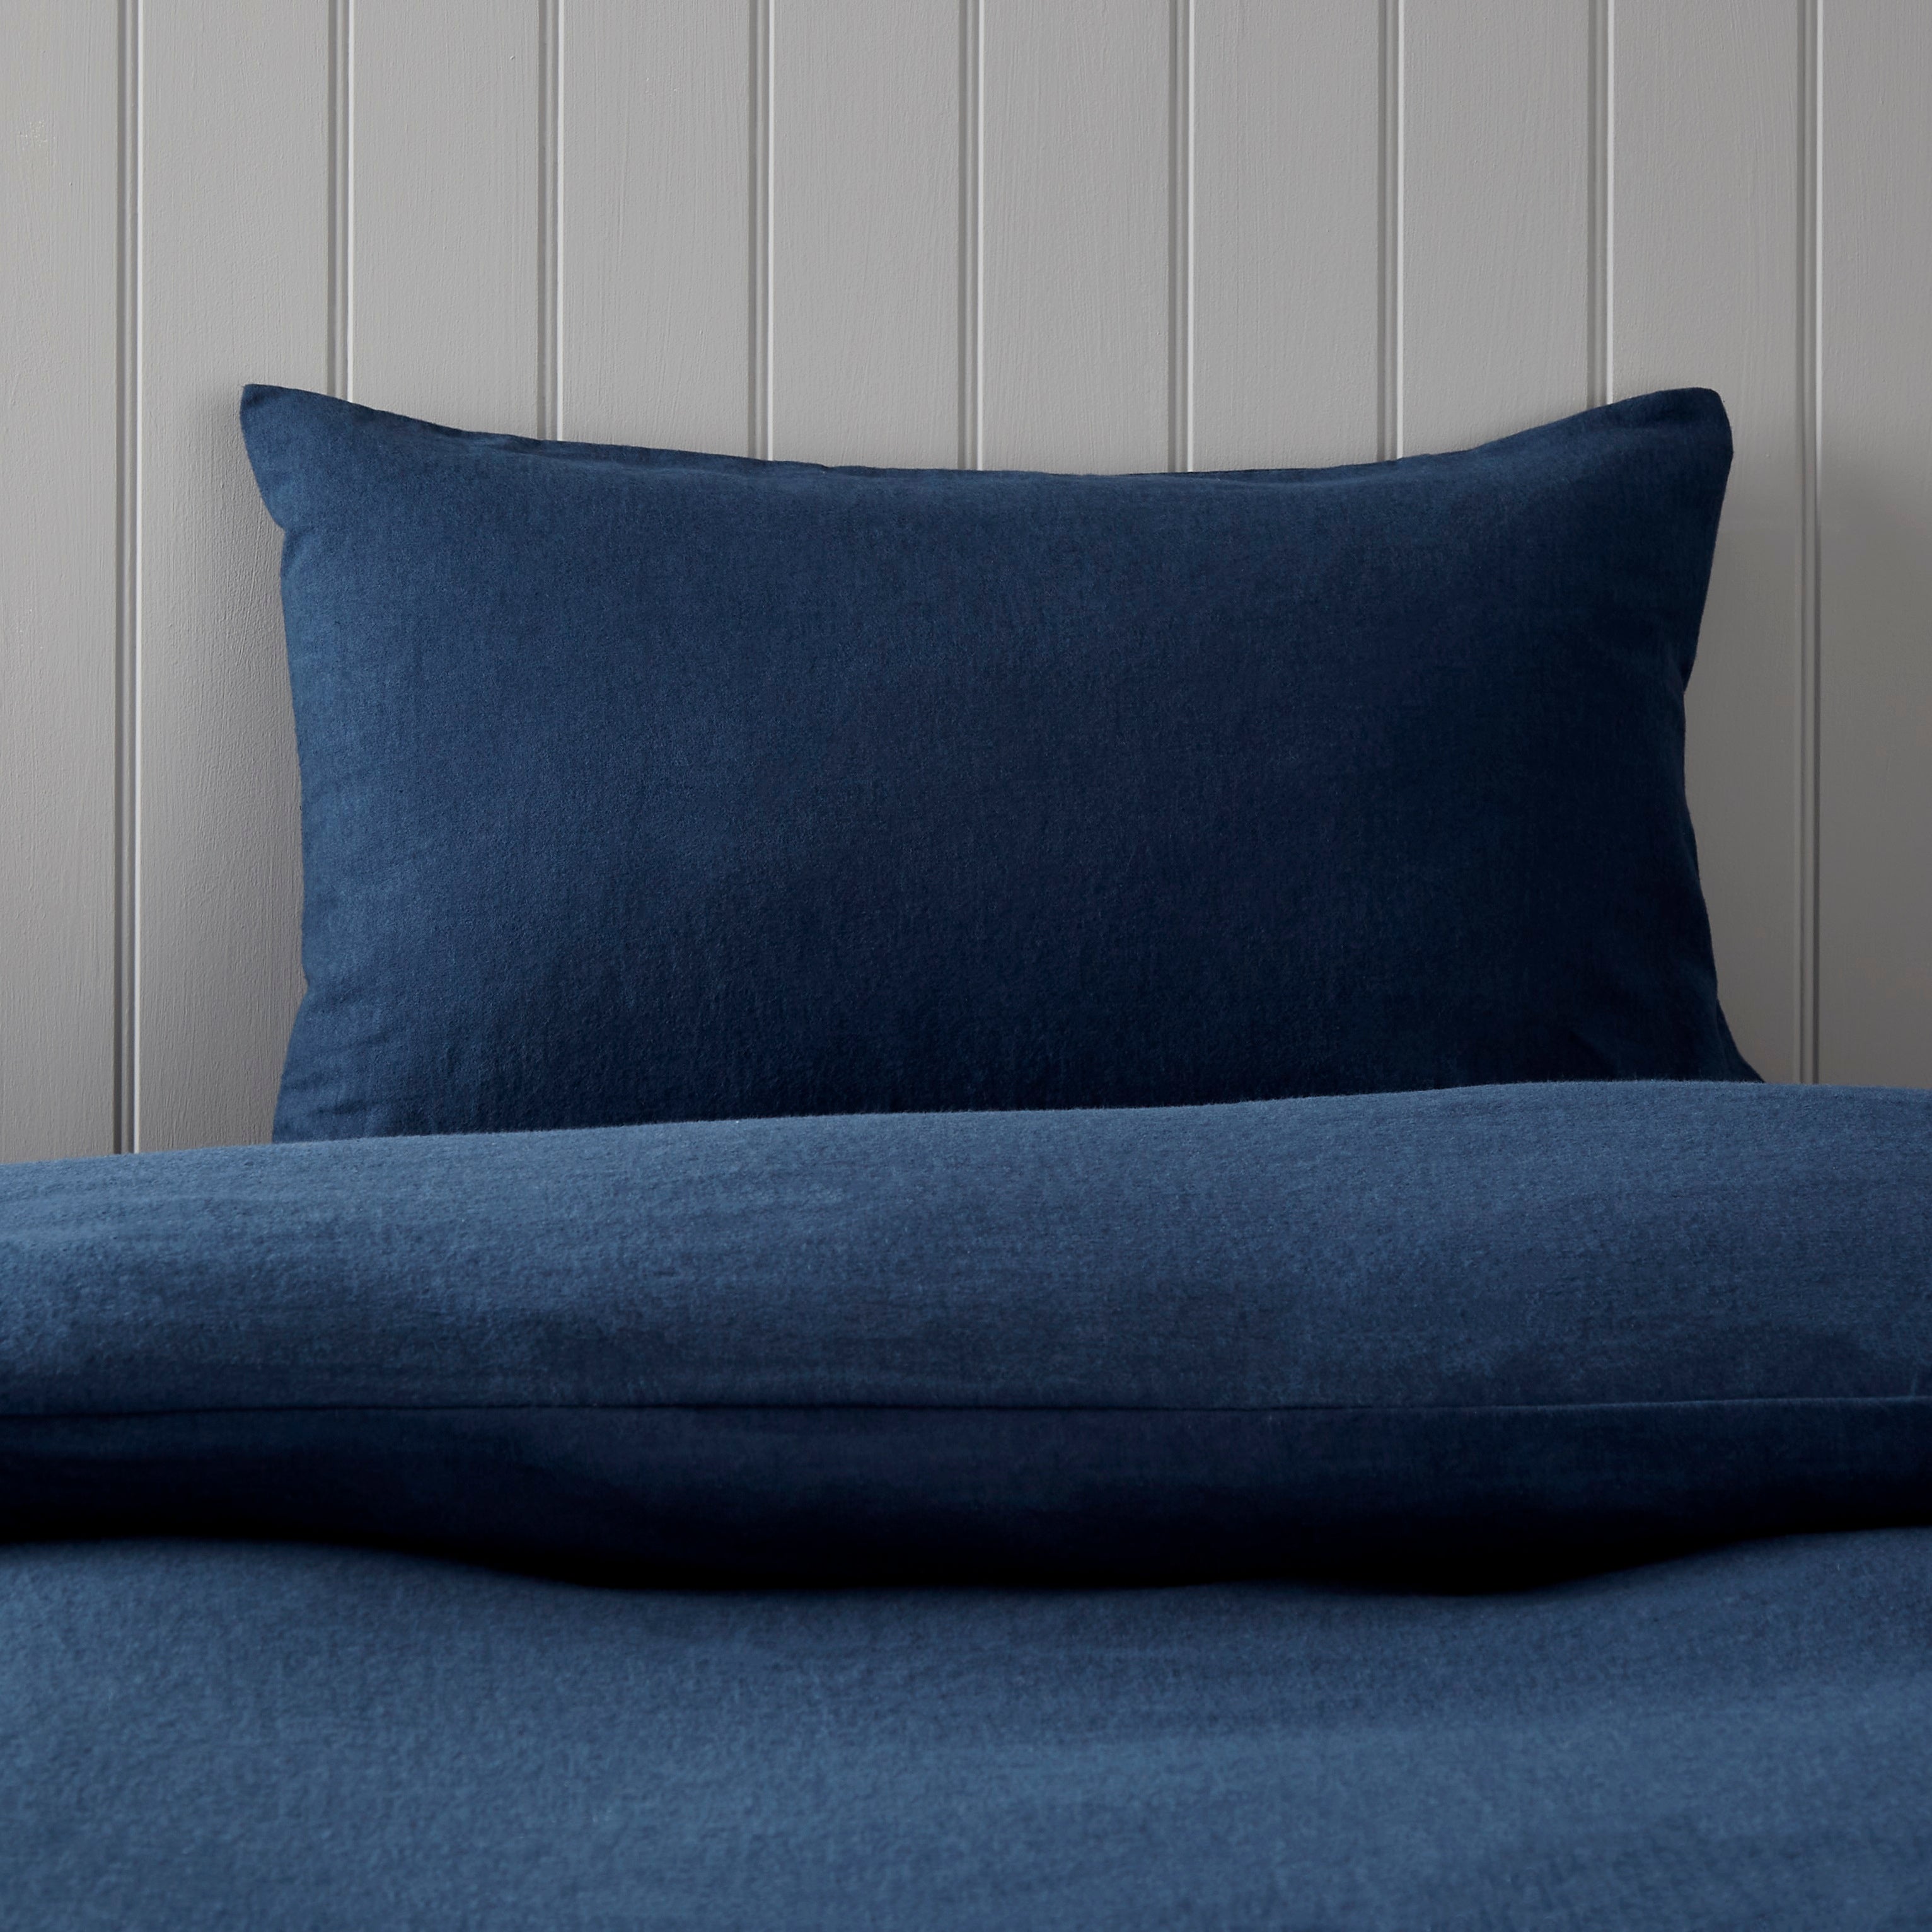 Soft Cosy Luxury Brushed Cotton Standard Pillowcase Pair Navy Blue